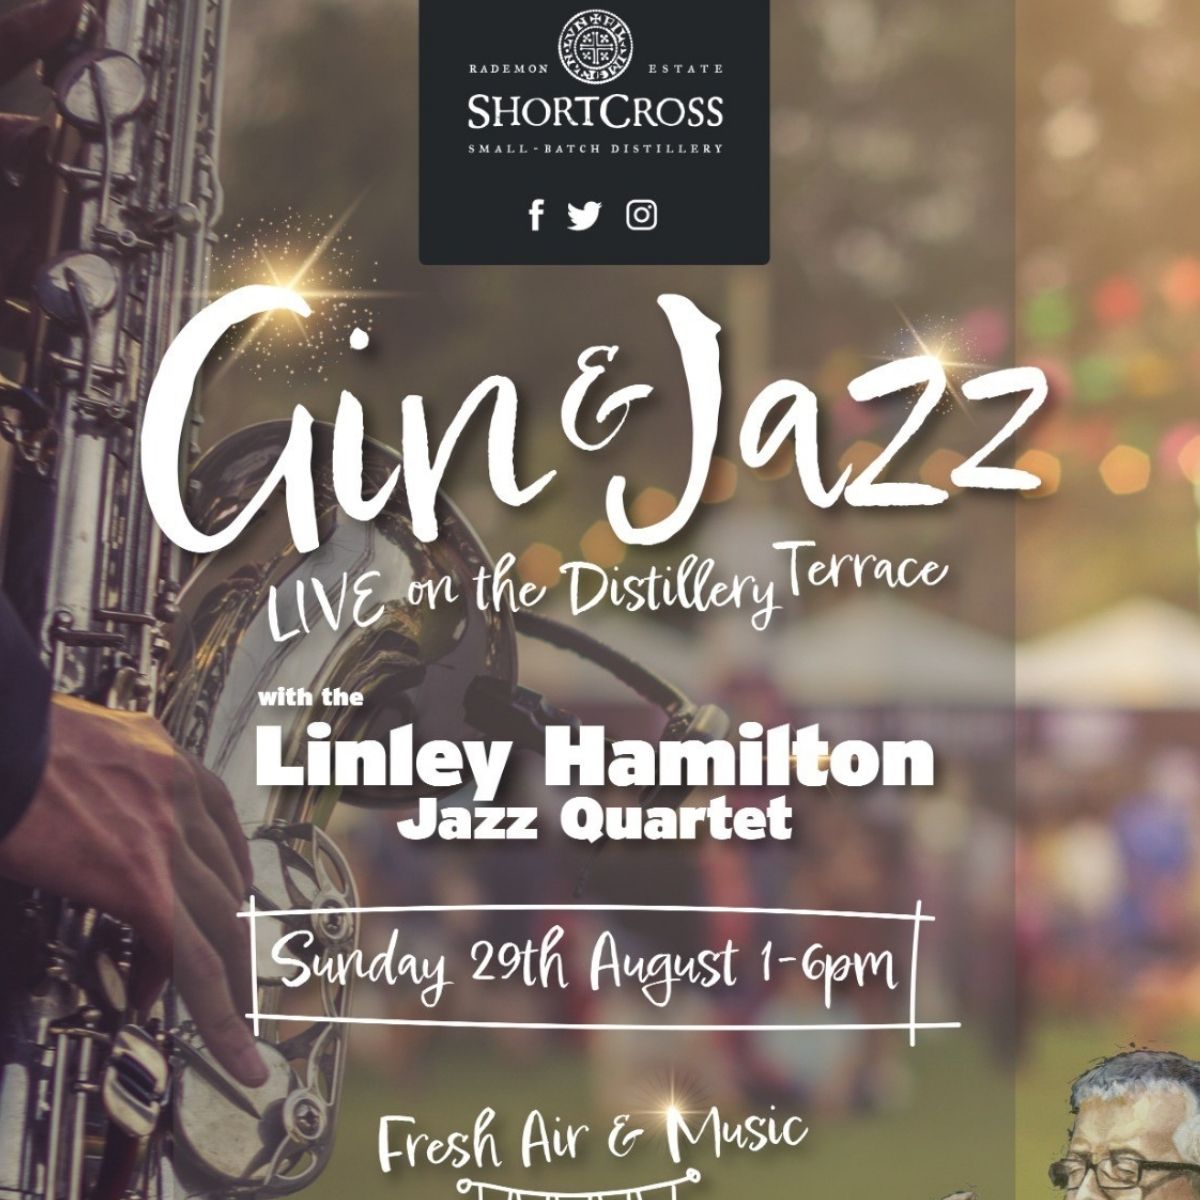 Gin and Jazz Sunday – Sold Out